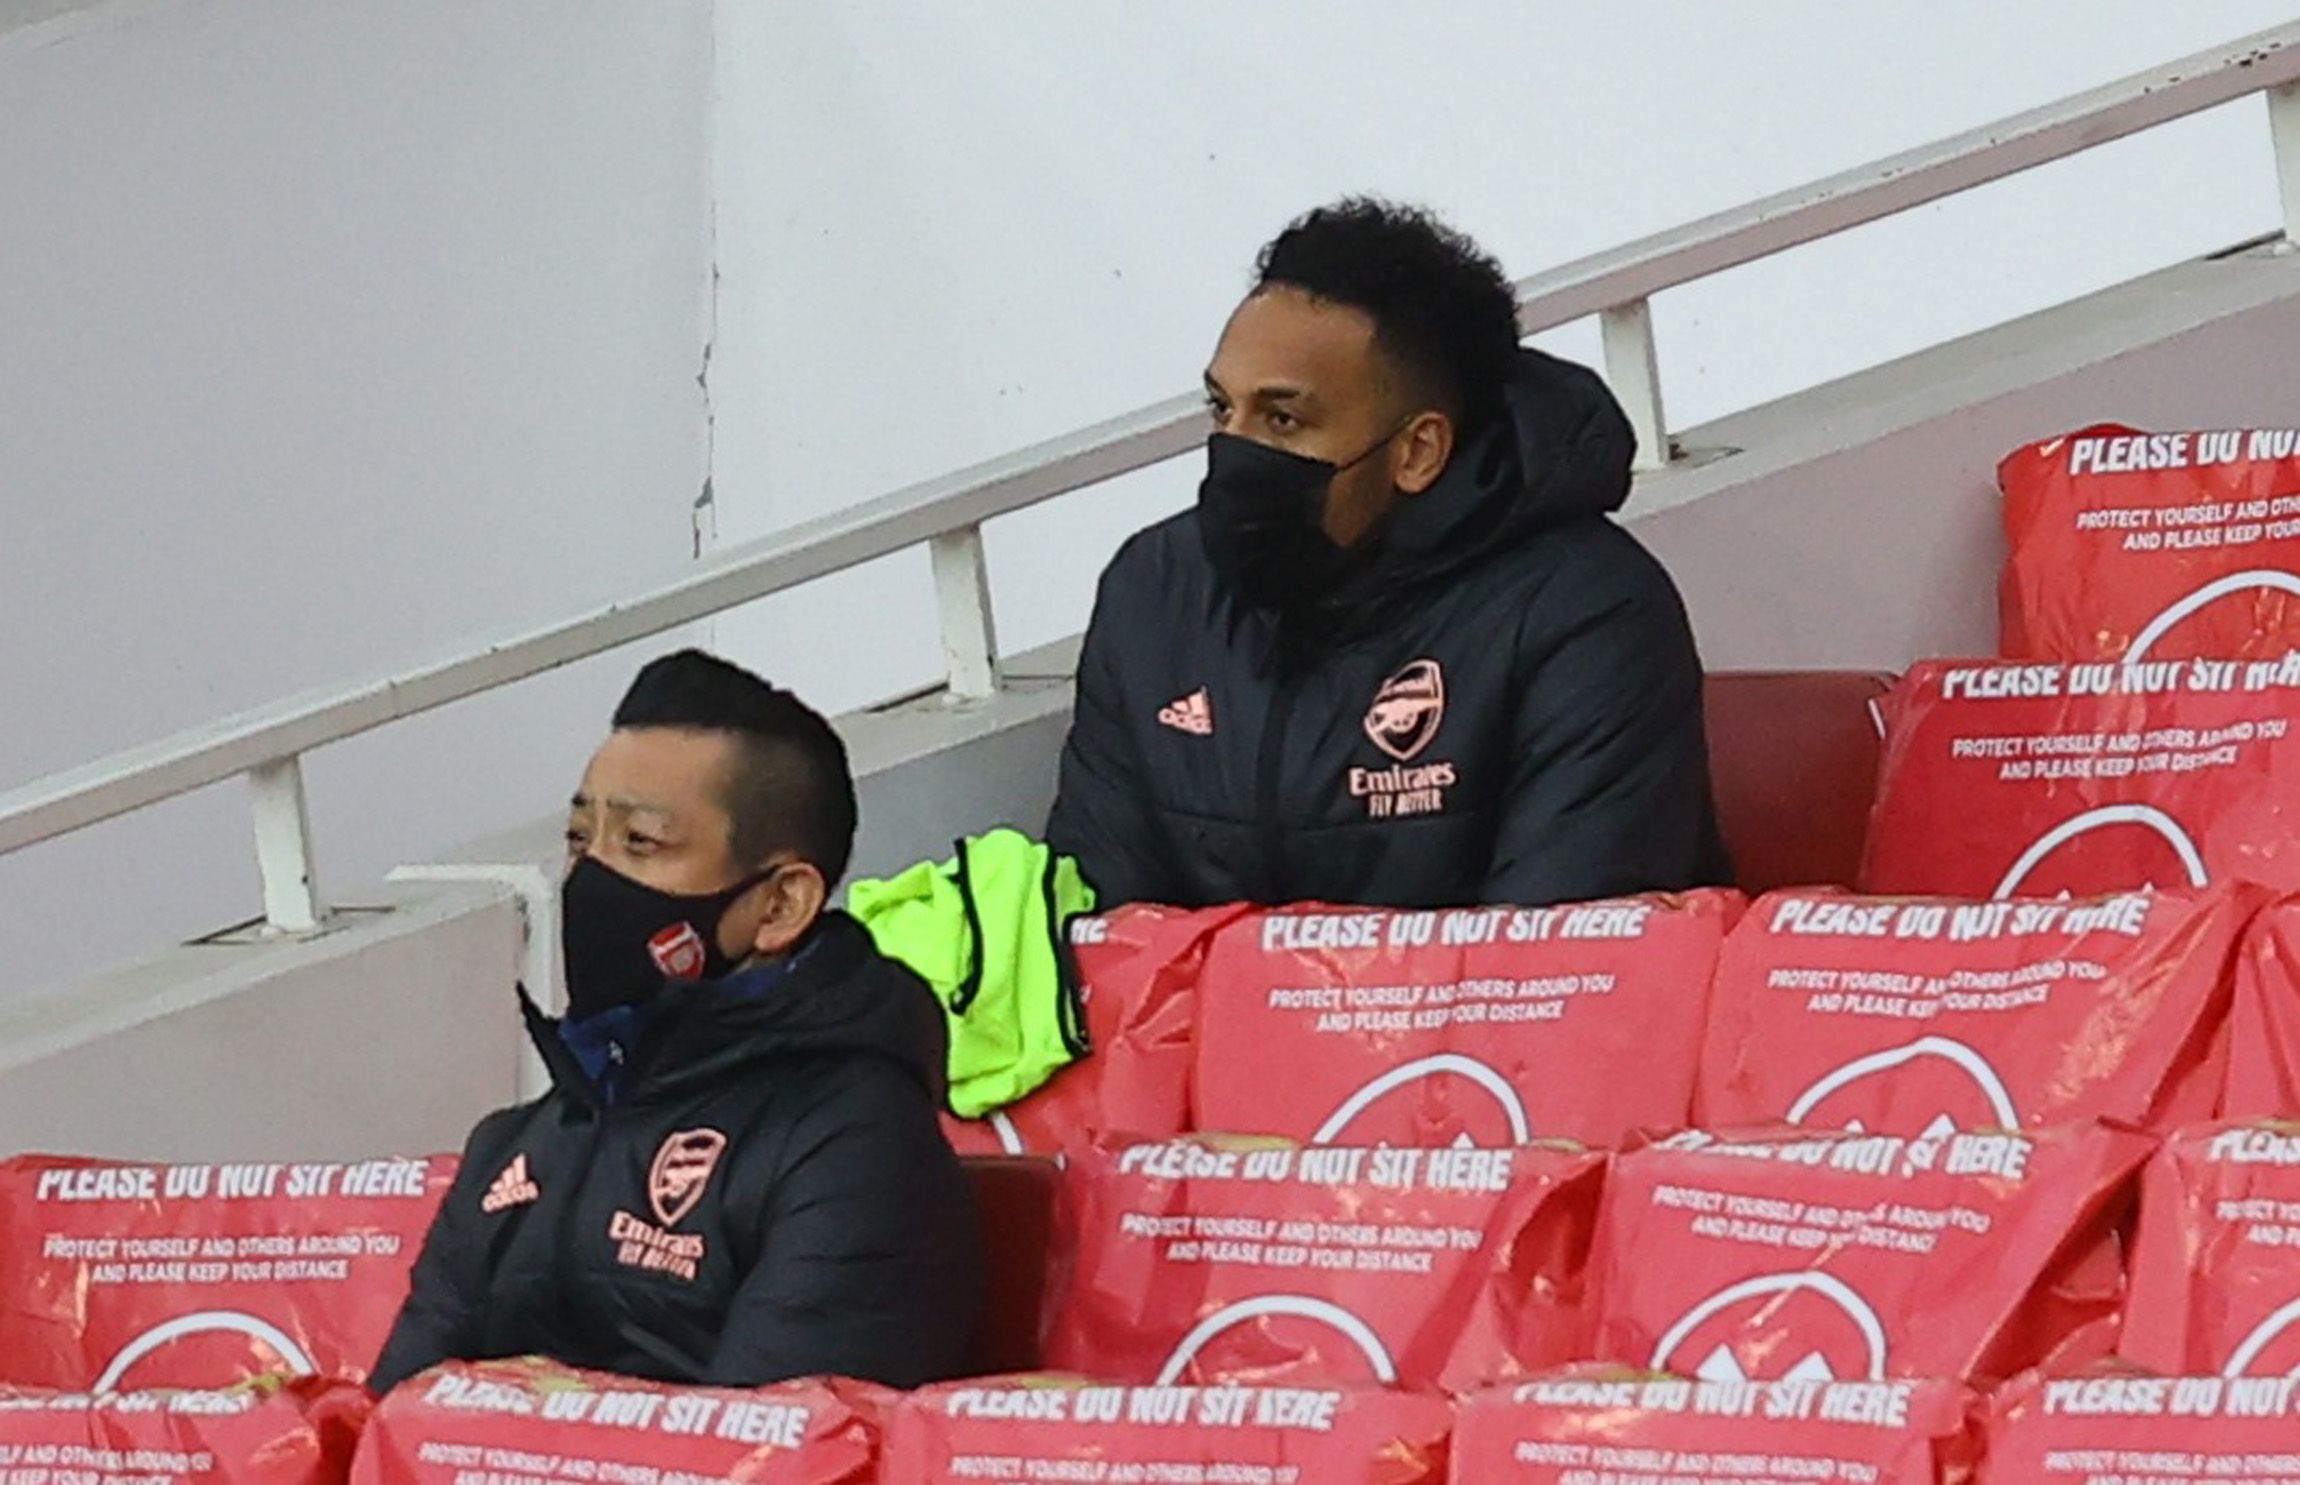 Soccer Football - Premier League - Arsenal v Tottenham Hotspur - Emirates Stadium, London, Britain - March 14, 2021 Arsenal's Pierre-Emerick Aubameyang on the substitutes bench Pool via REUTERS/Julian Finney EDITORIAL USE ONLY. No use with unauthorized audio, video, data, fixture lists, club/league logos or 'live' services. Online in-match use limited to 75 images, no video emulation. No use in betting, games or single club /league/player publications.  Please contact your account representative